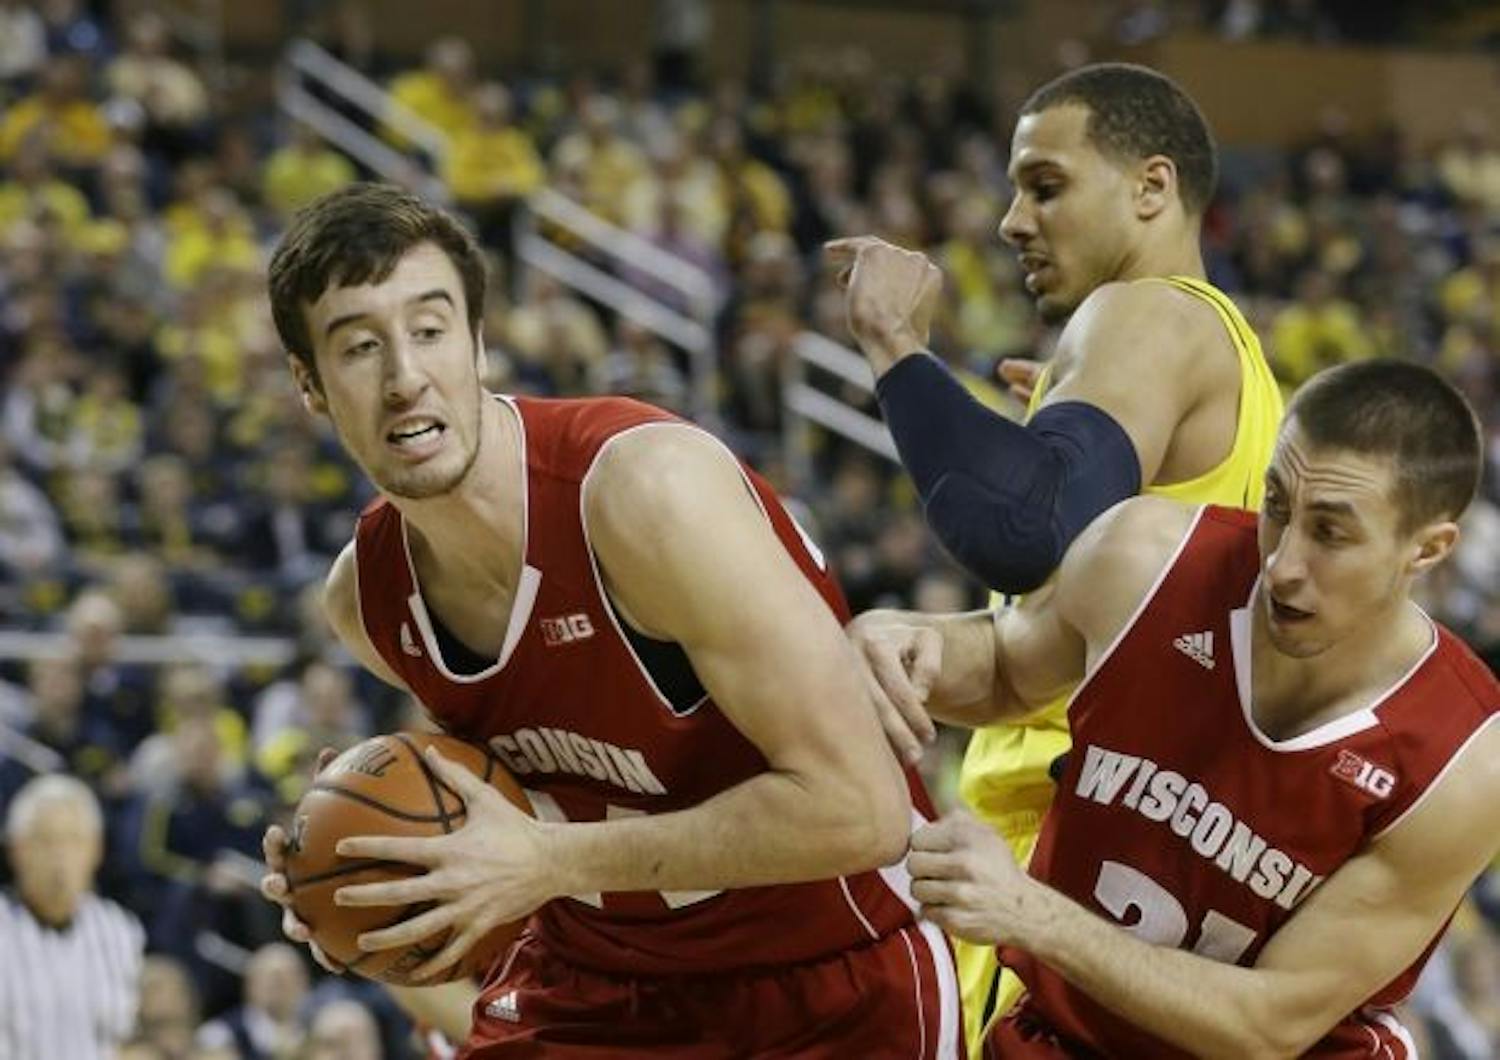 Photos: A big win on the road for Badgers at Michigan